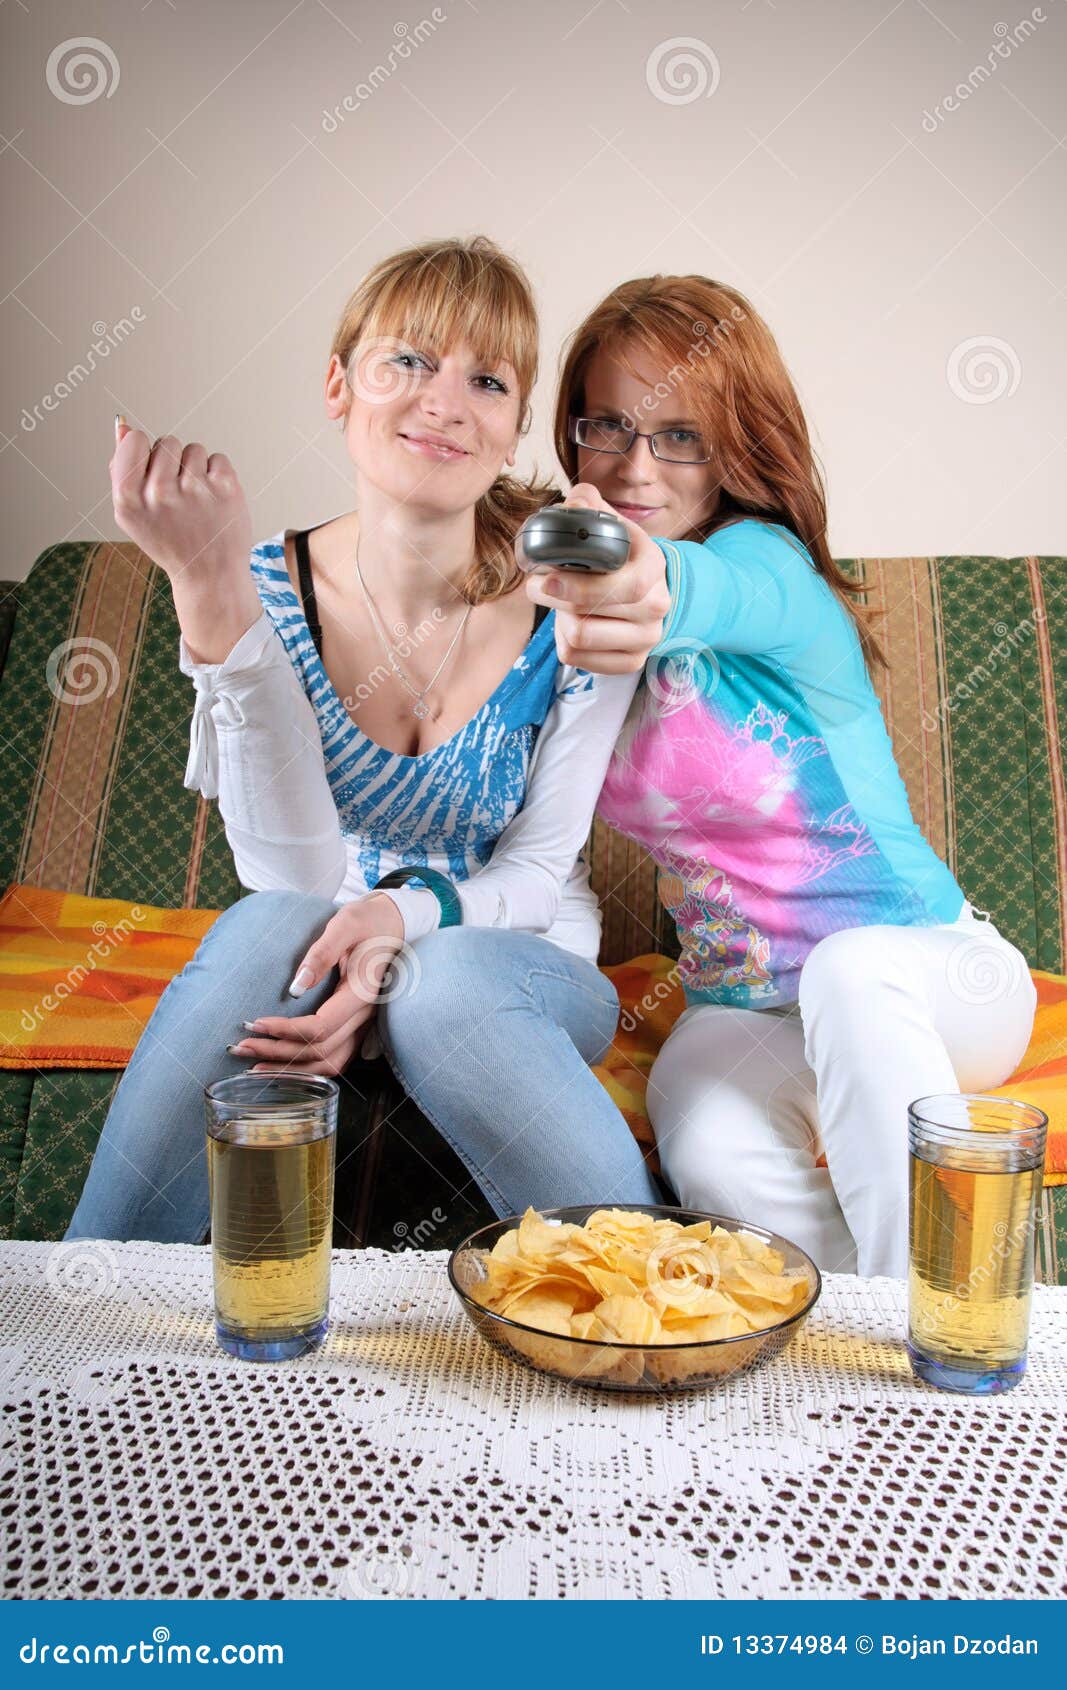 Two Girls Watching Shocked Content On Tablet Device On Beige Stock Image